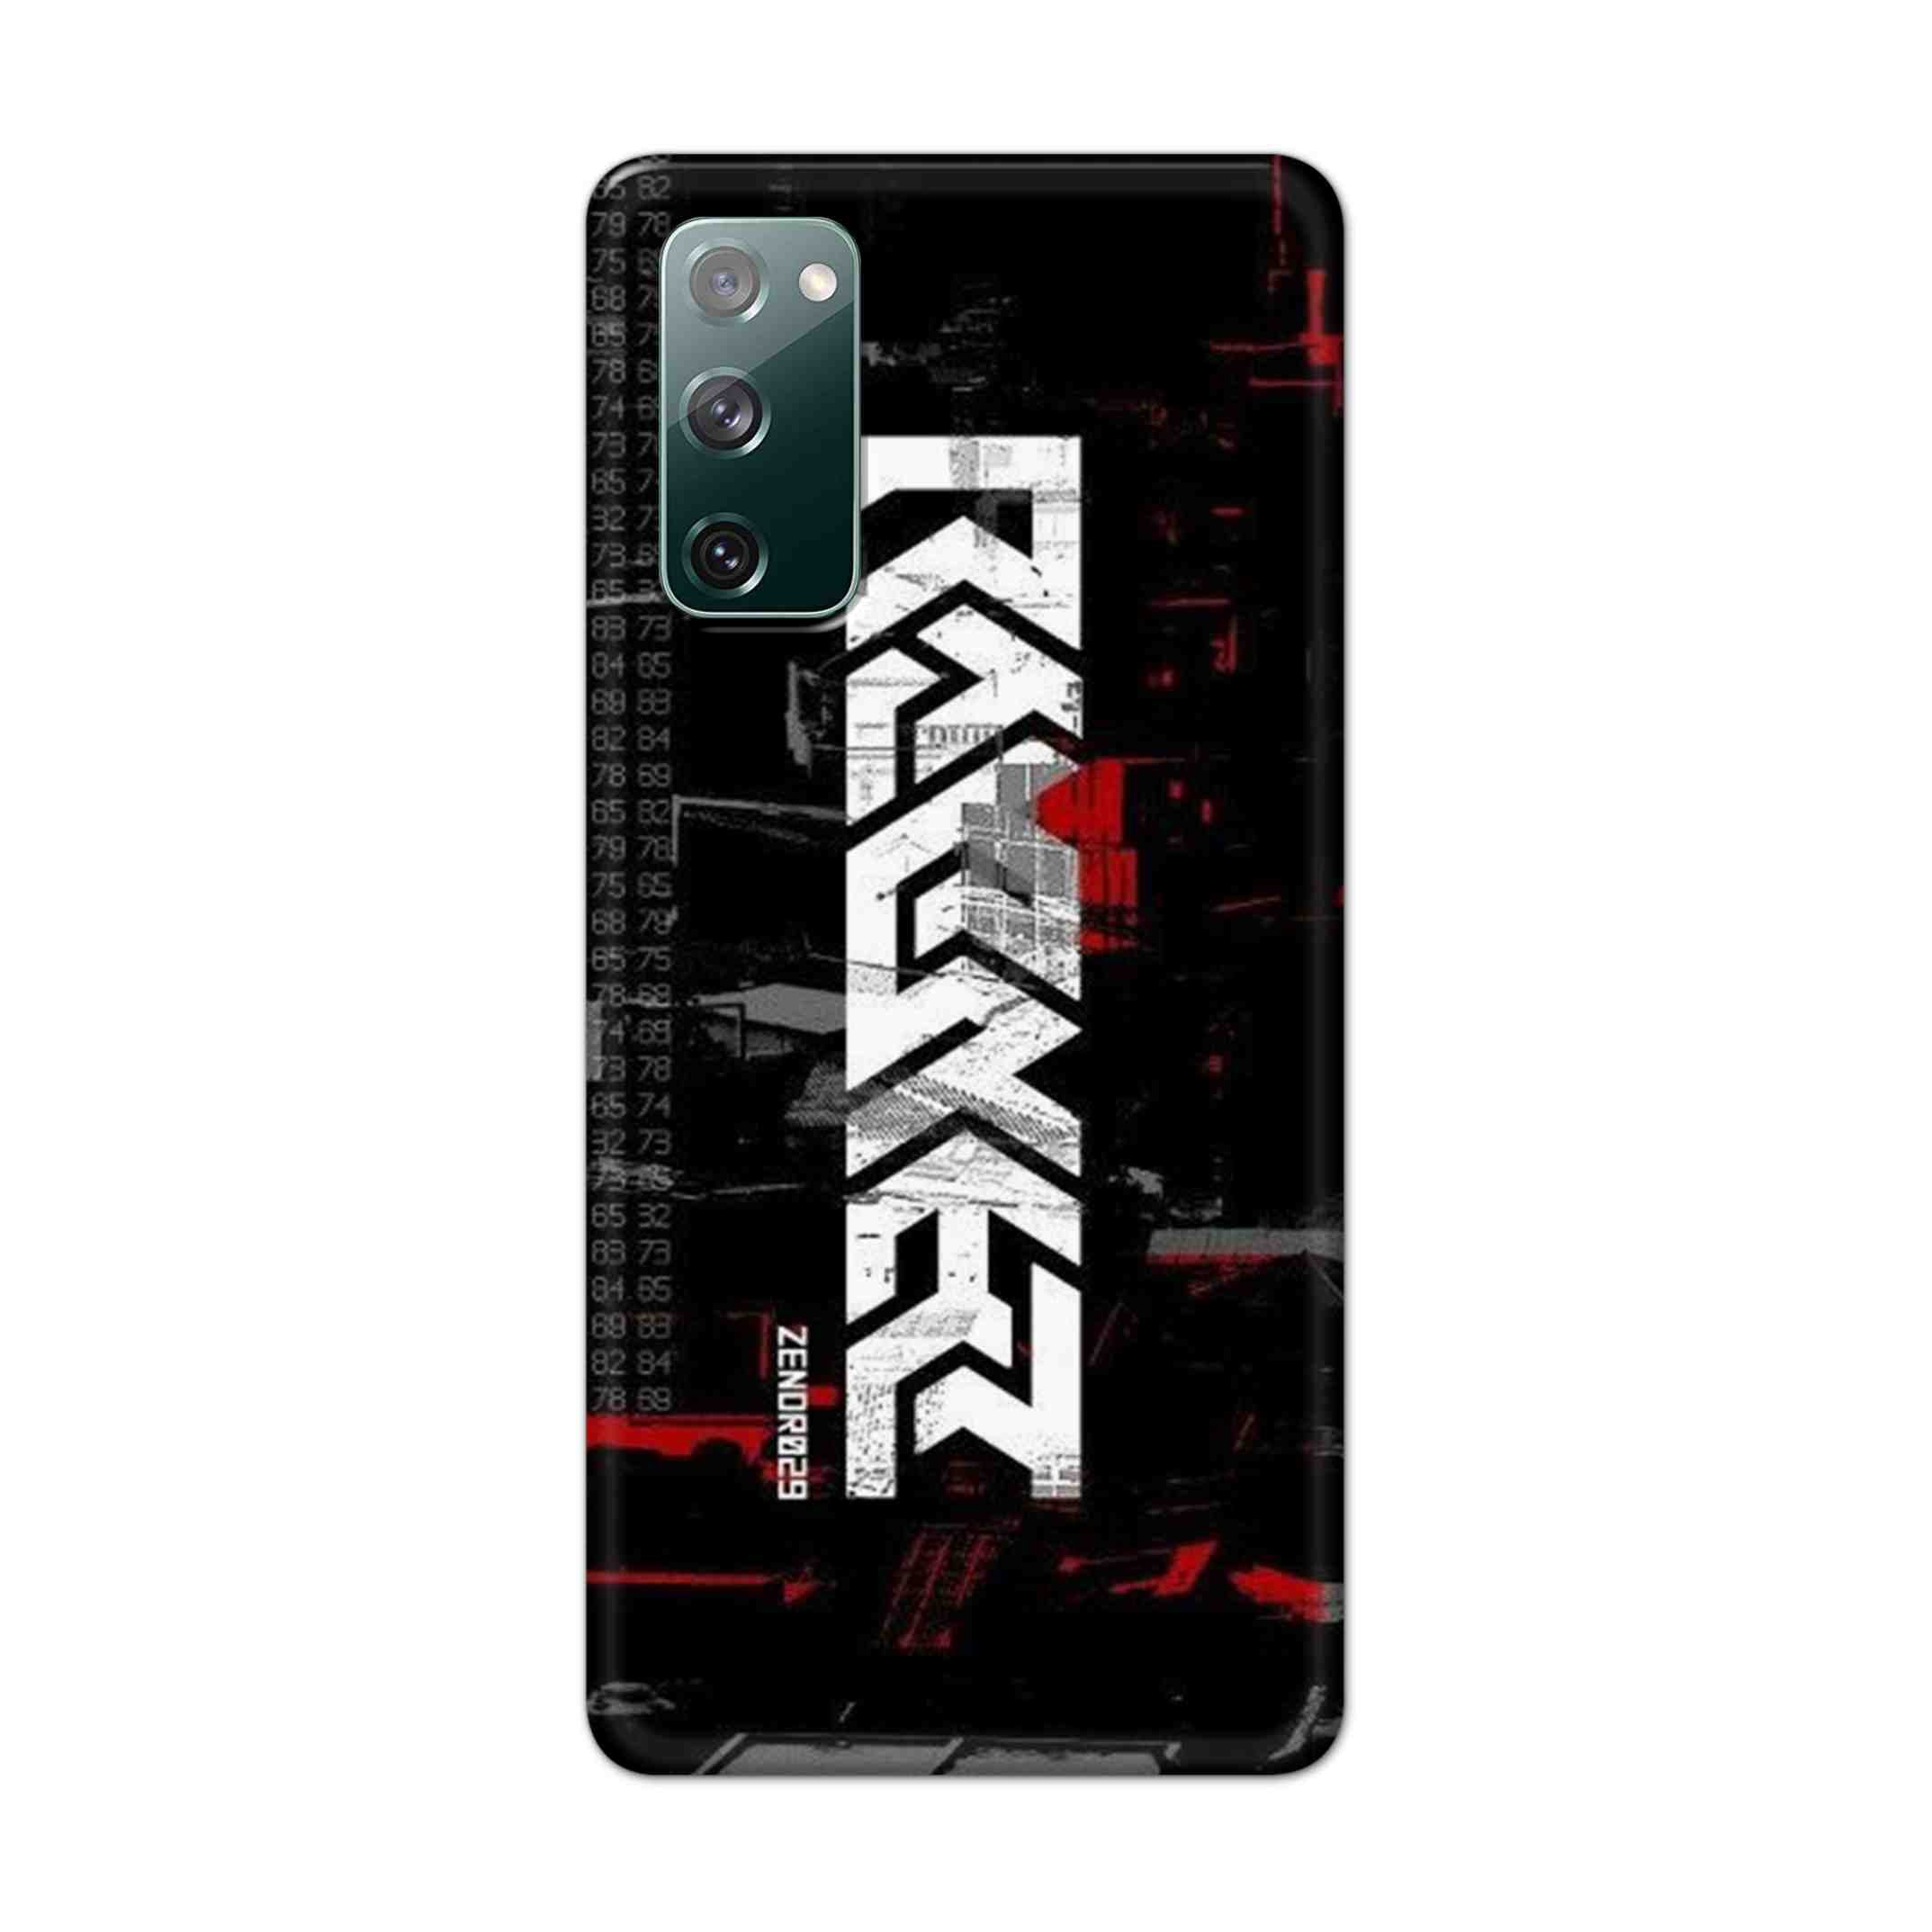 Buy Raxer Hard Back Mobile Phone Case Cover For Samsung Galaxy S20 FE Online